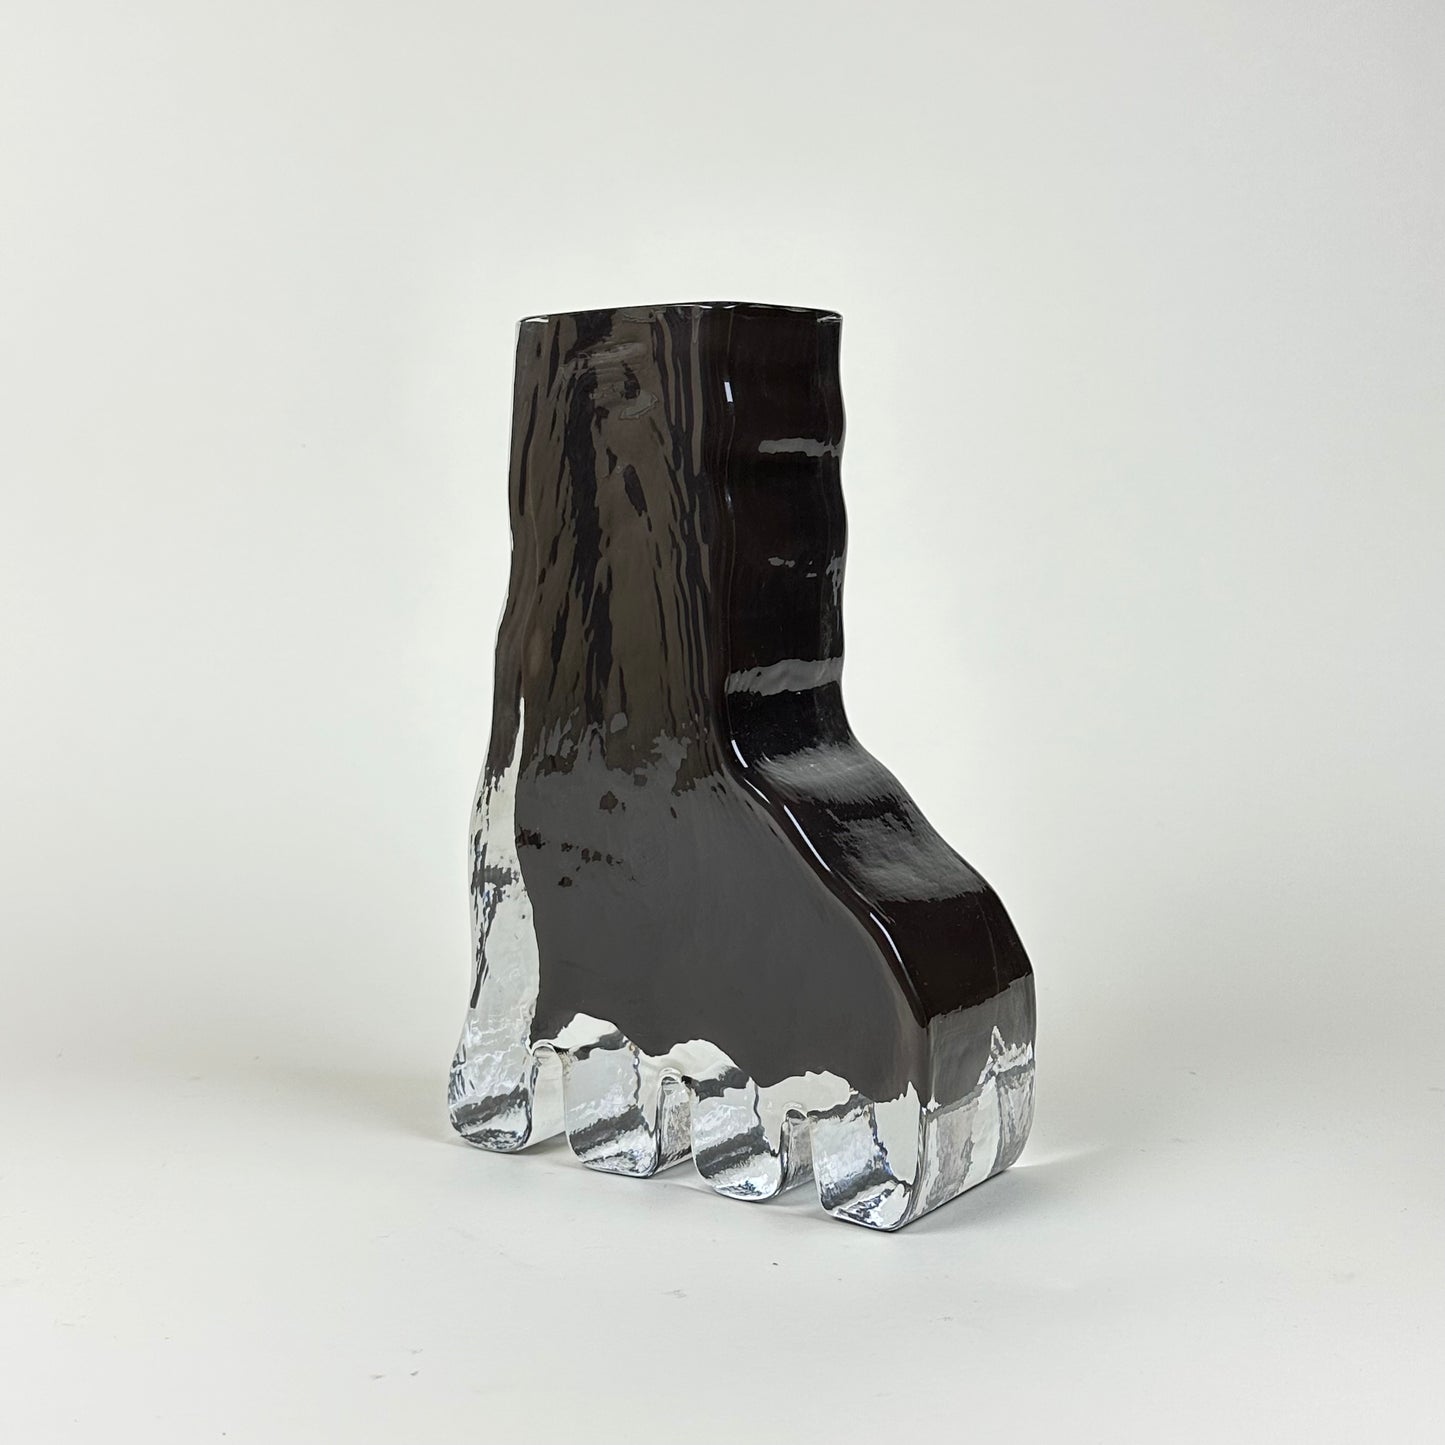 Studio Reiser "Paw" vase black, limited edition for Arranging Things